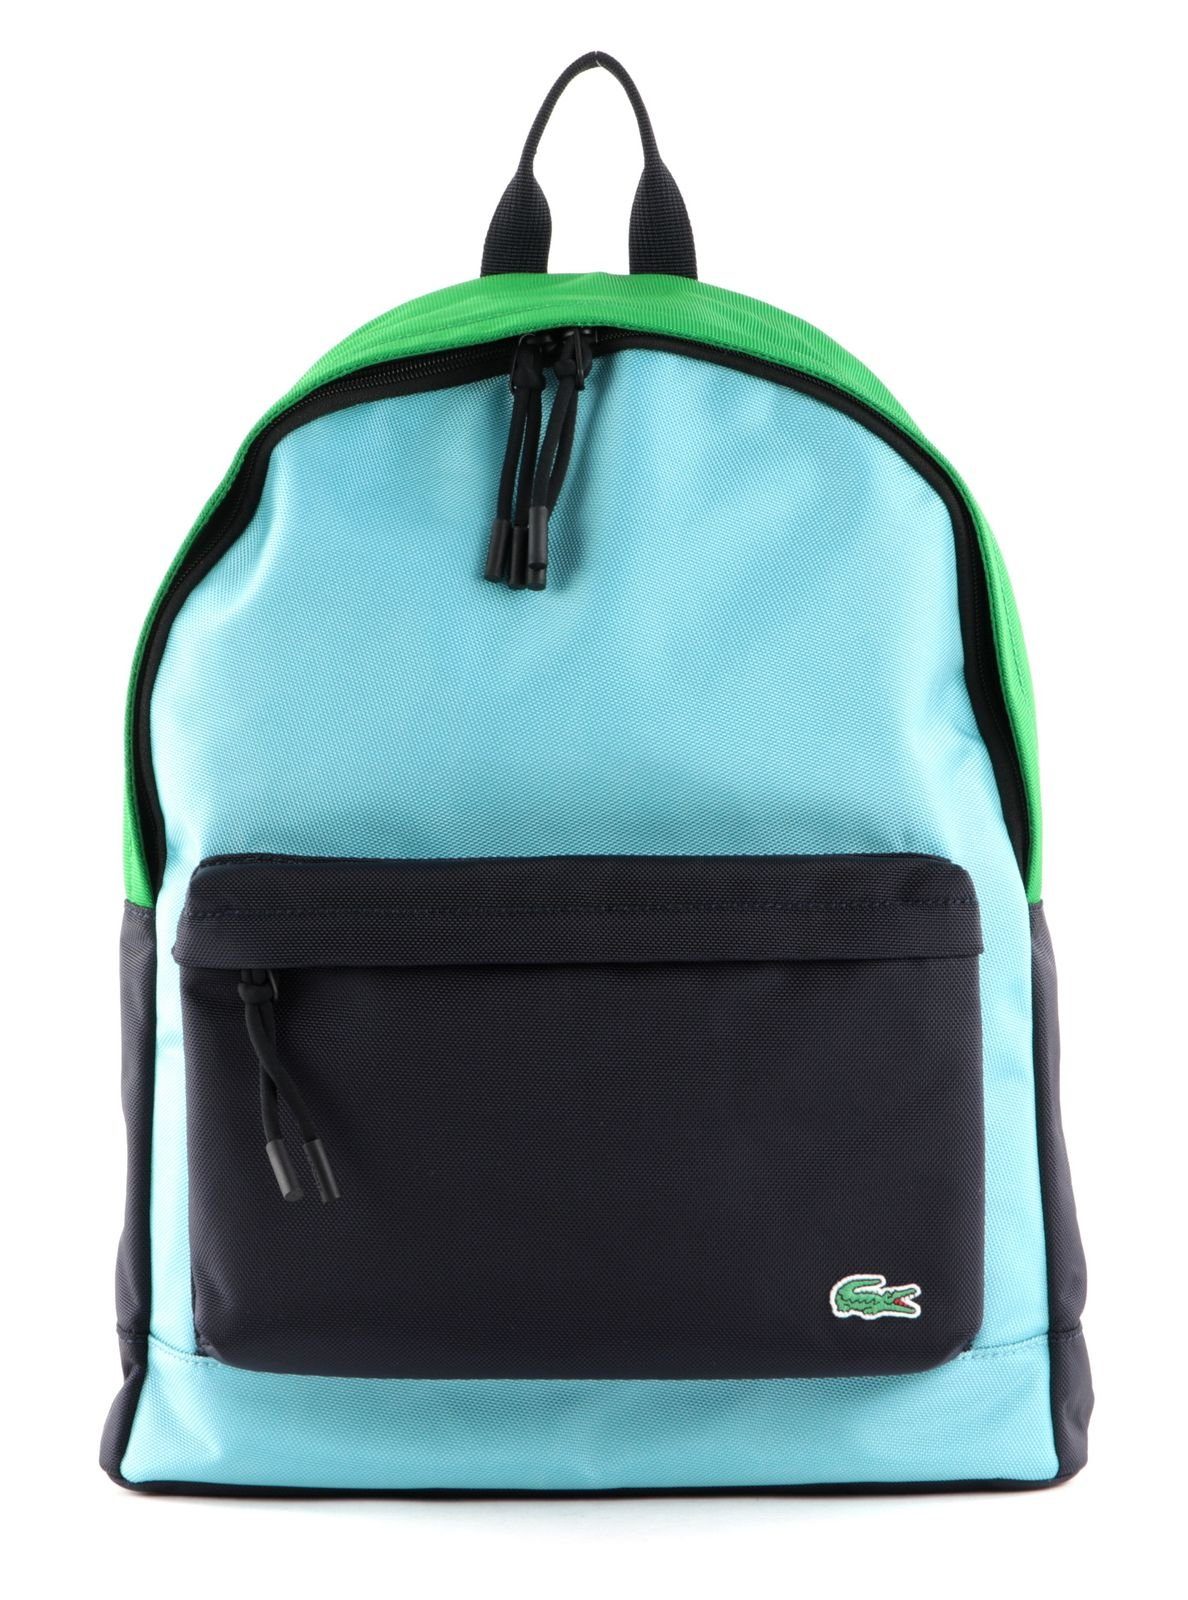 Lacoste Rucksack Holiday Package Abime Malachite Azur